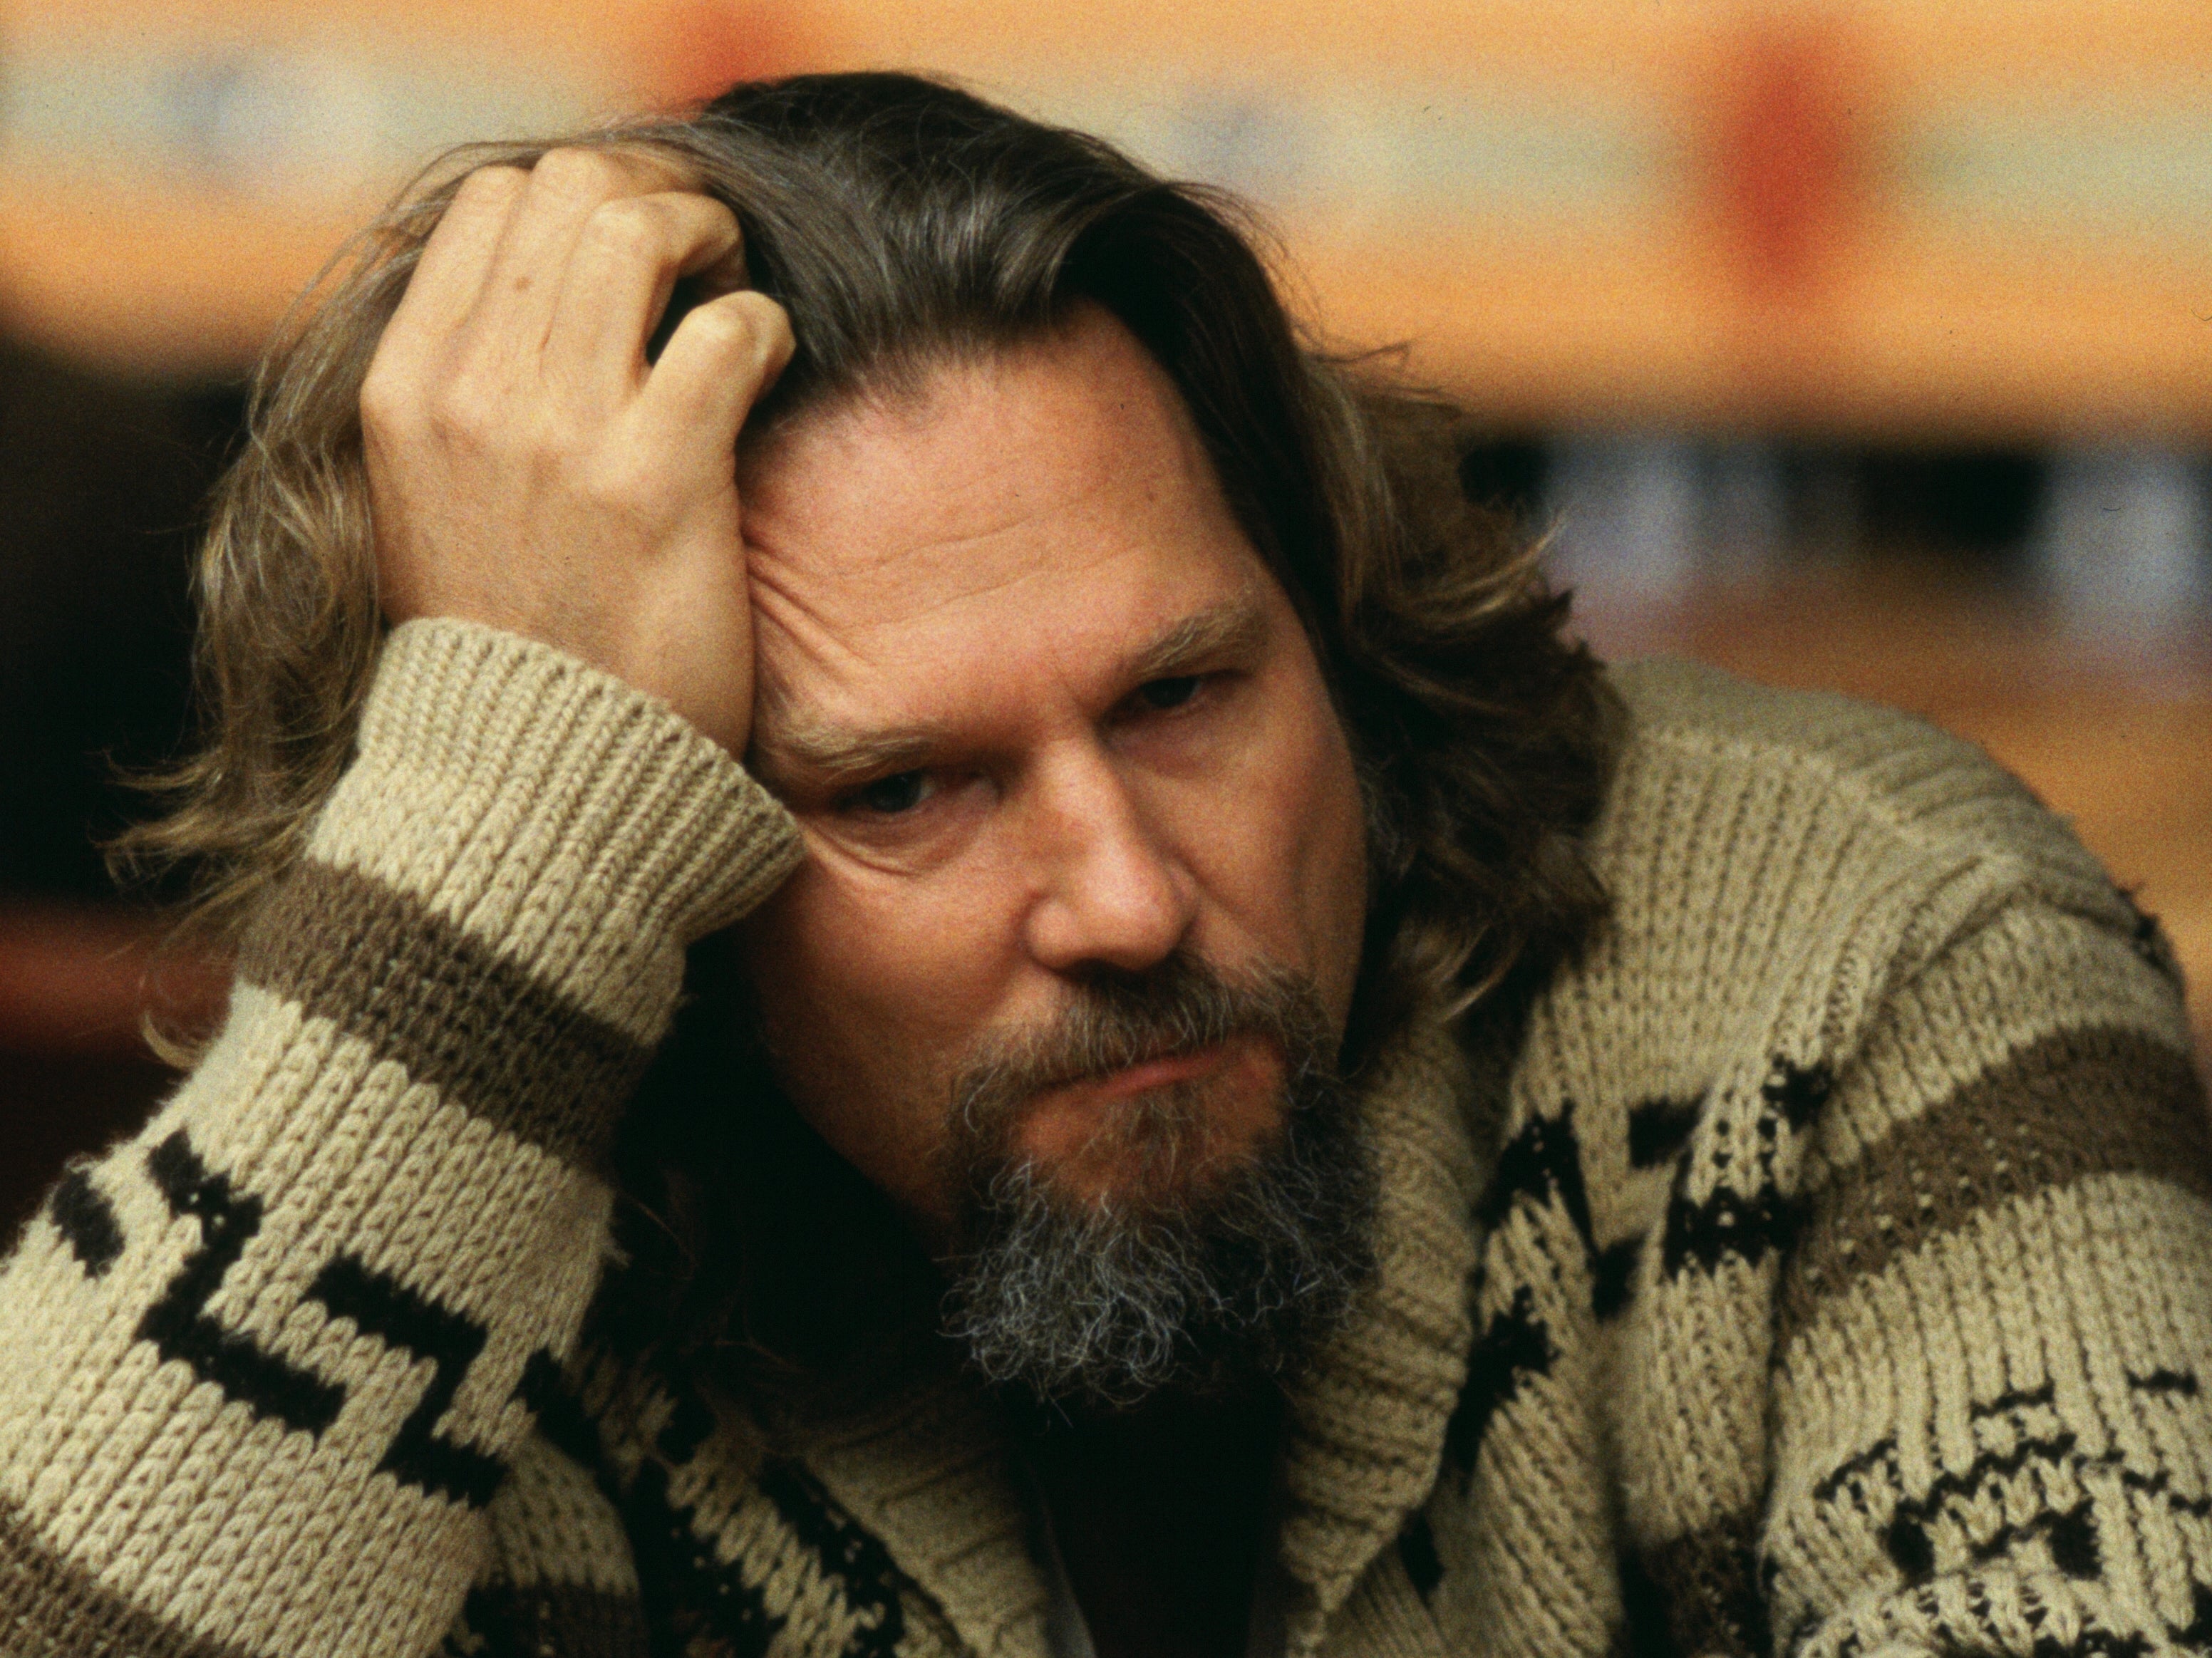 Tying the room together: Bridges as ‘The Dude’ in the Coens’ left-brained neo-noir ‘The Big Lebowski’